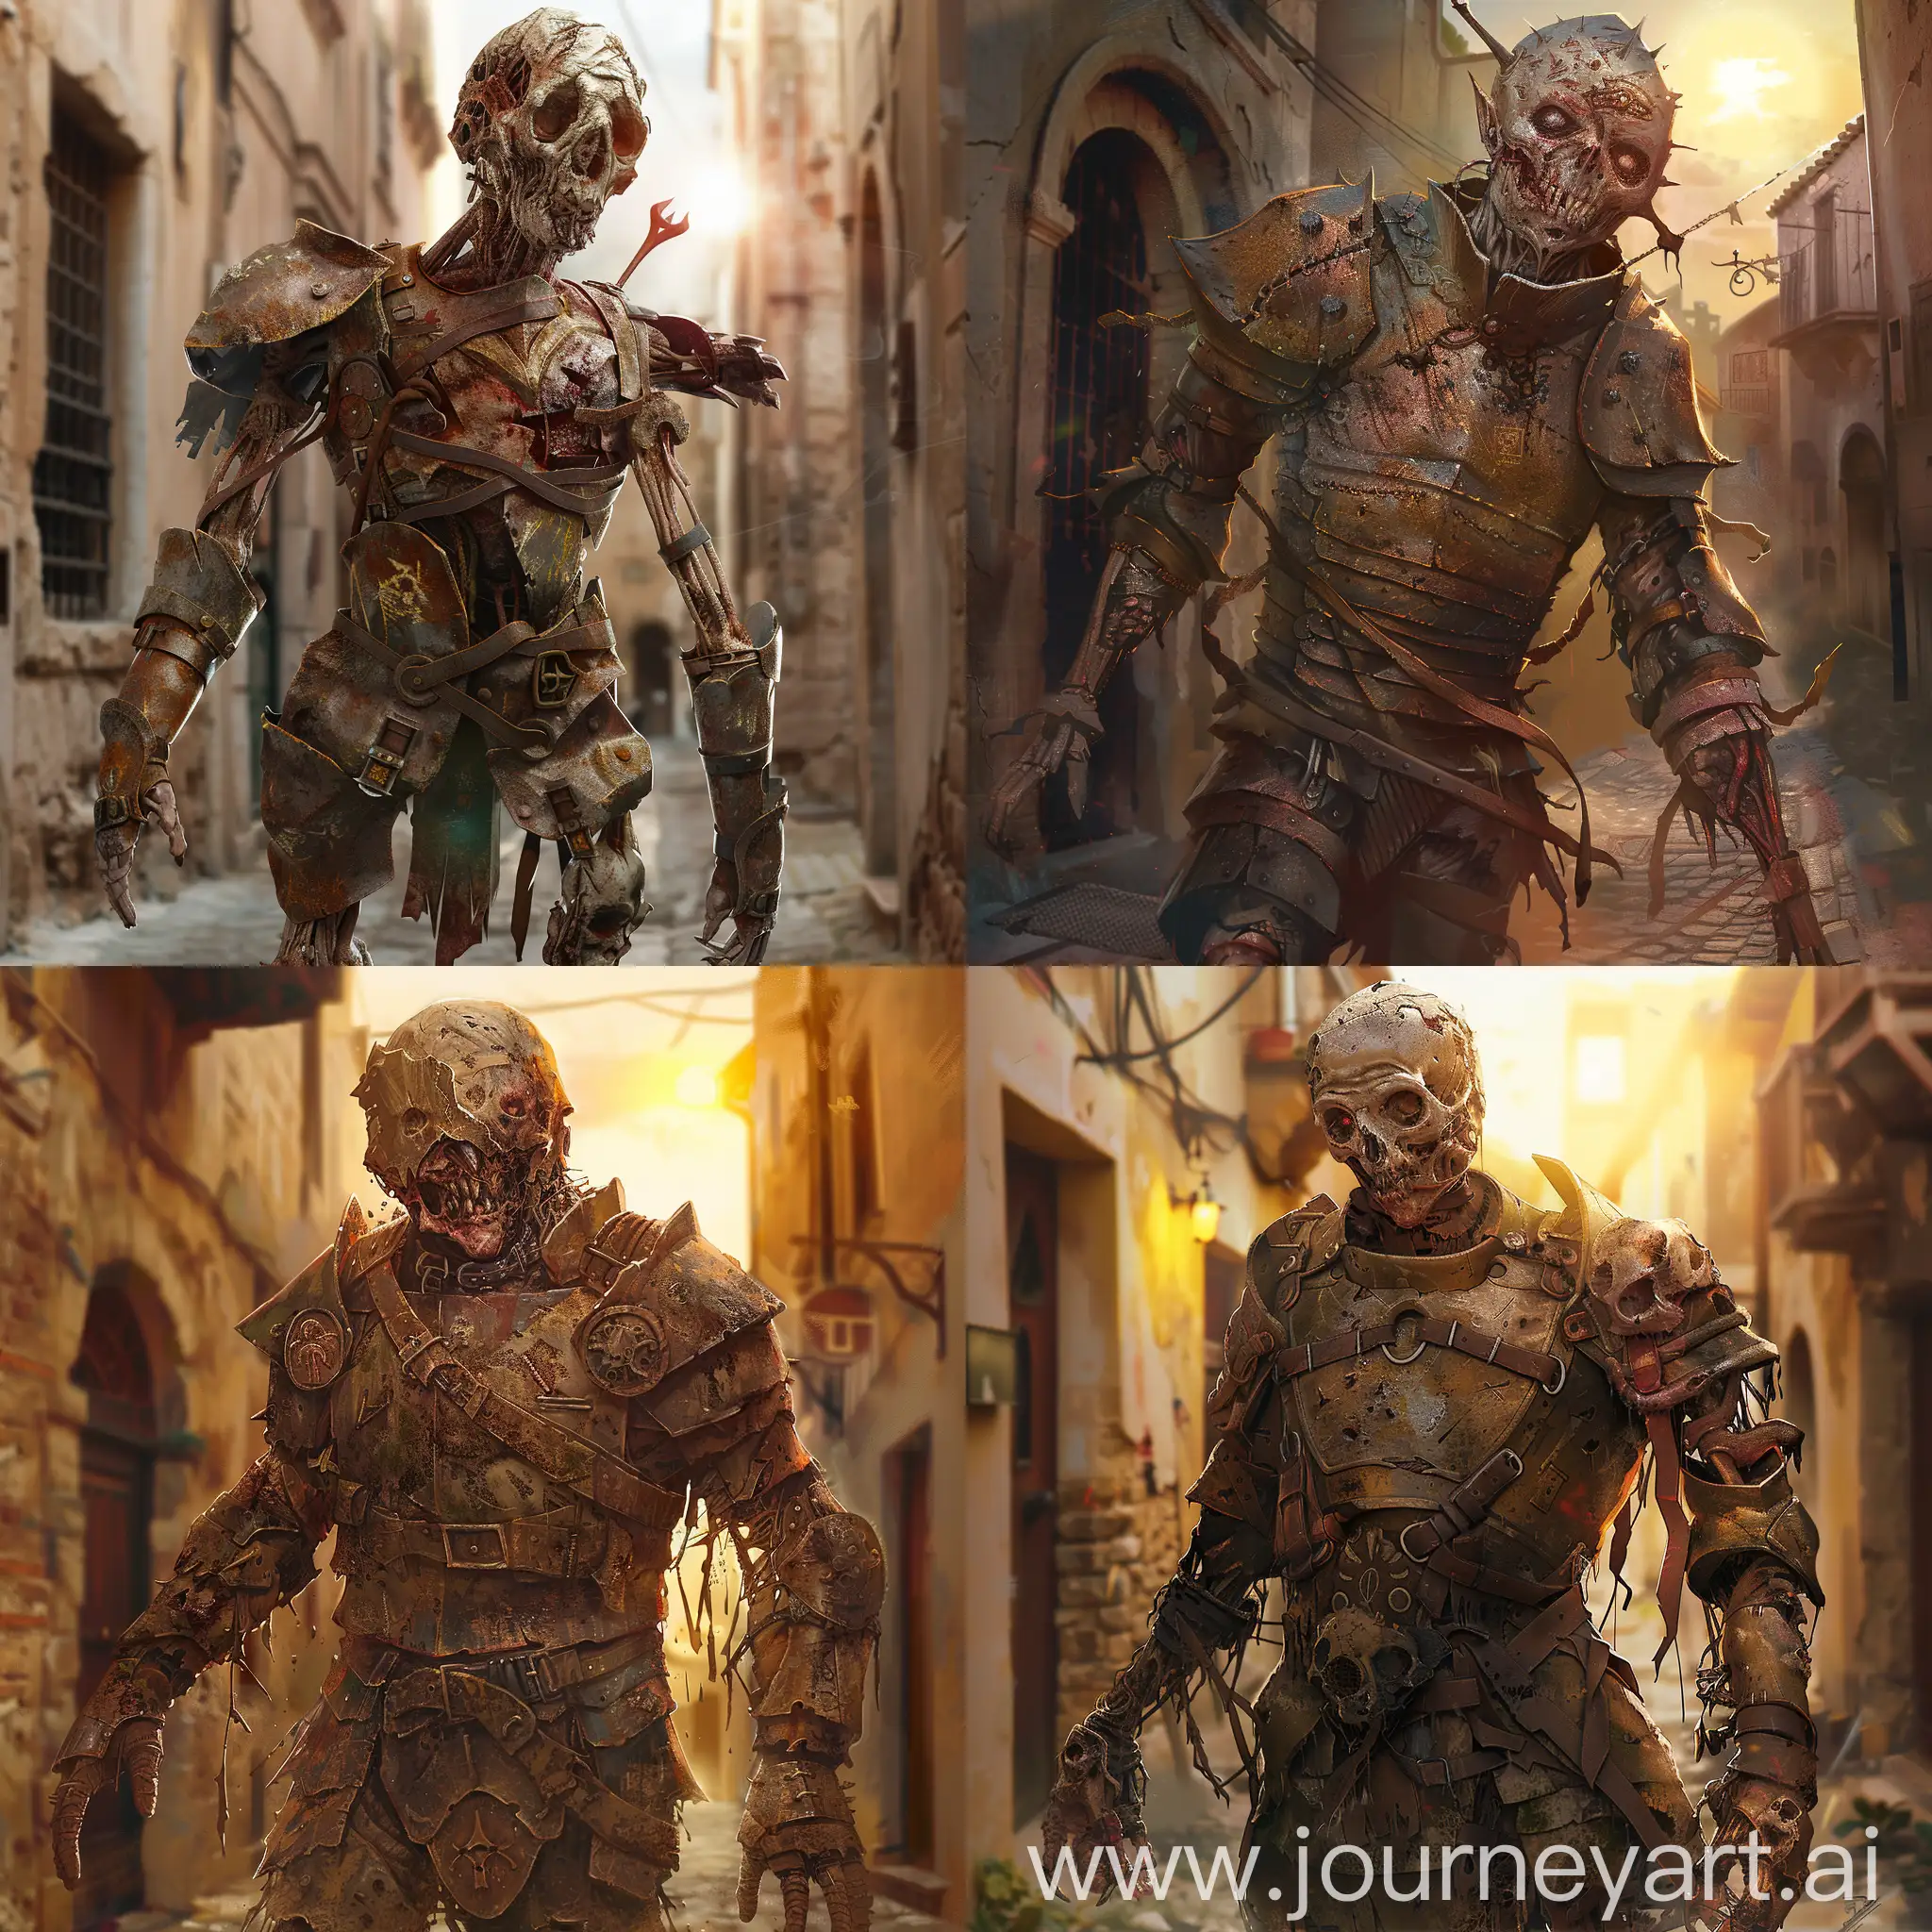 Undead-Homunculus-in-Rusted-Plate-Armor-Walking-Through-Sunset-Alley